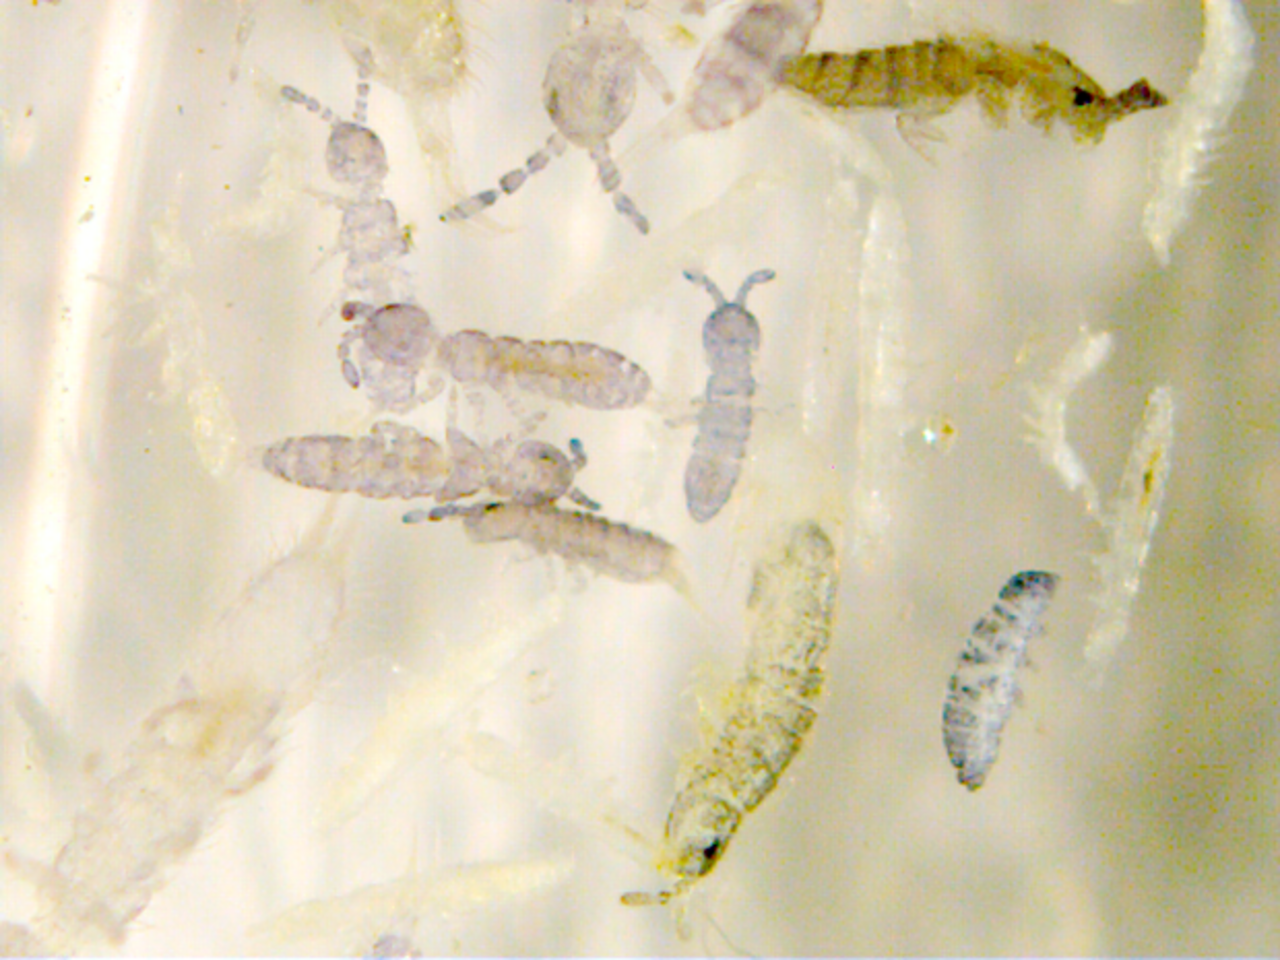 Diversity of collembolan species extracted from a soil sample